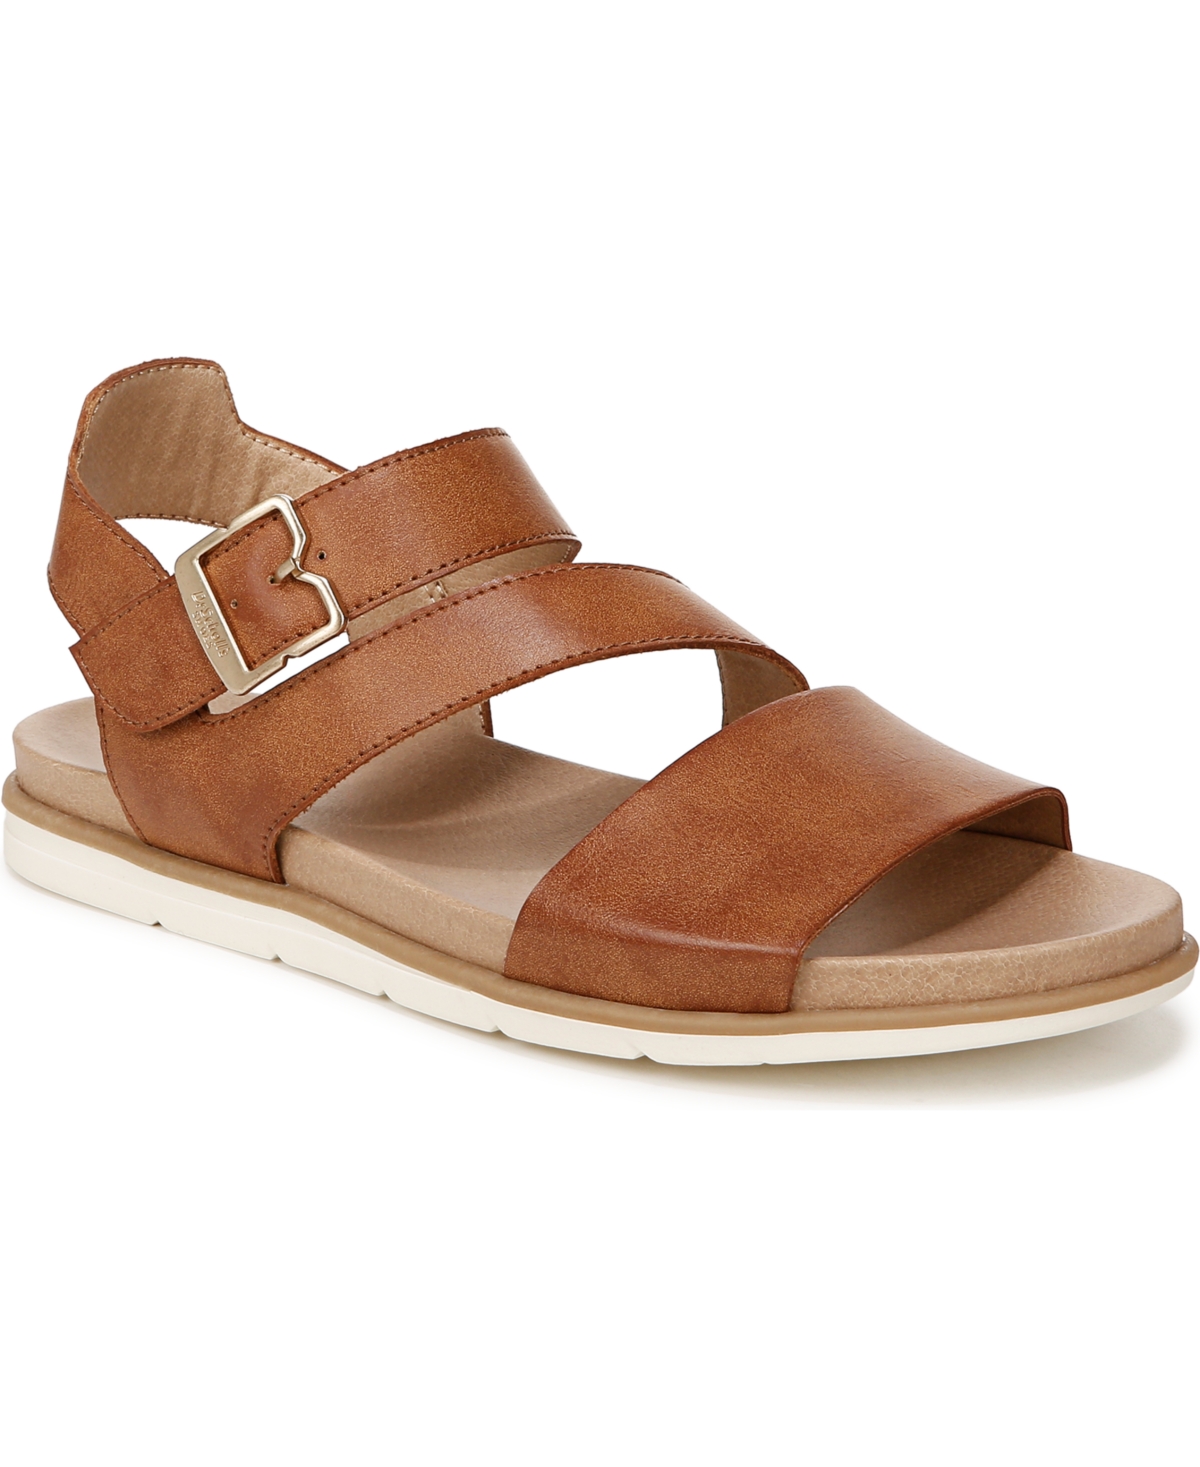 Dr. Scholl's Women's Nicely Fun Strappy Sandals In Honey Faux Leather